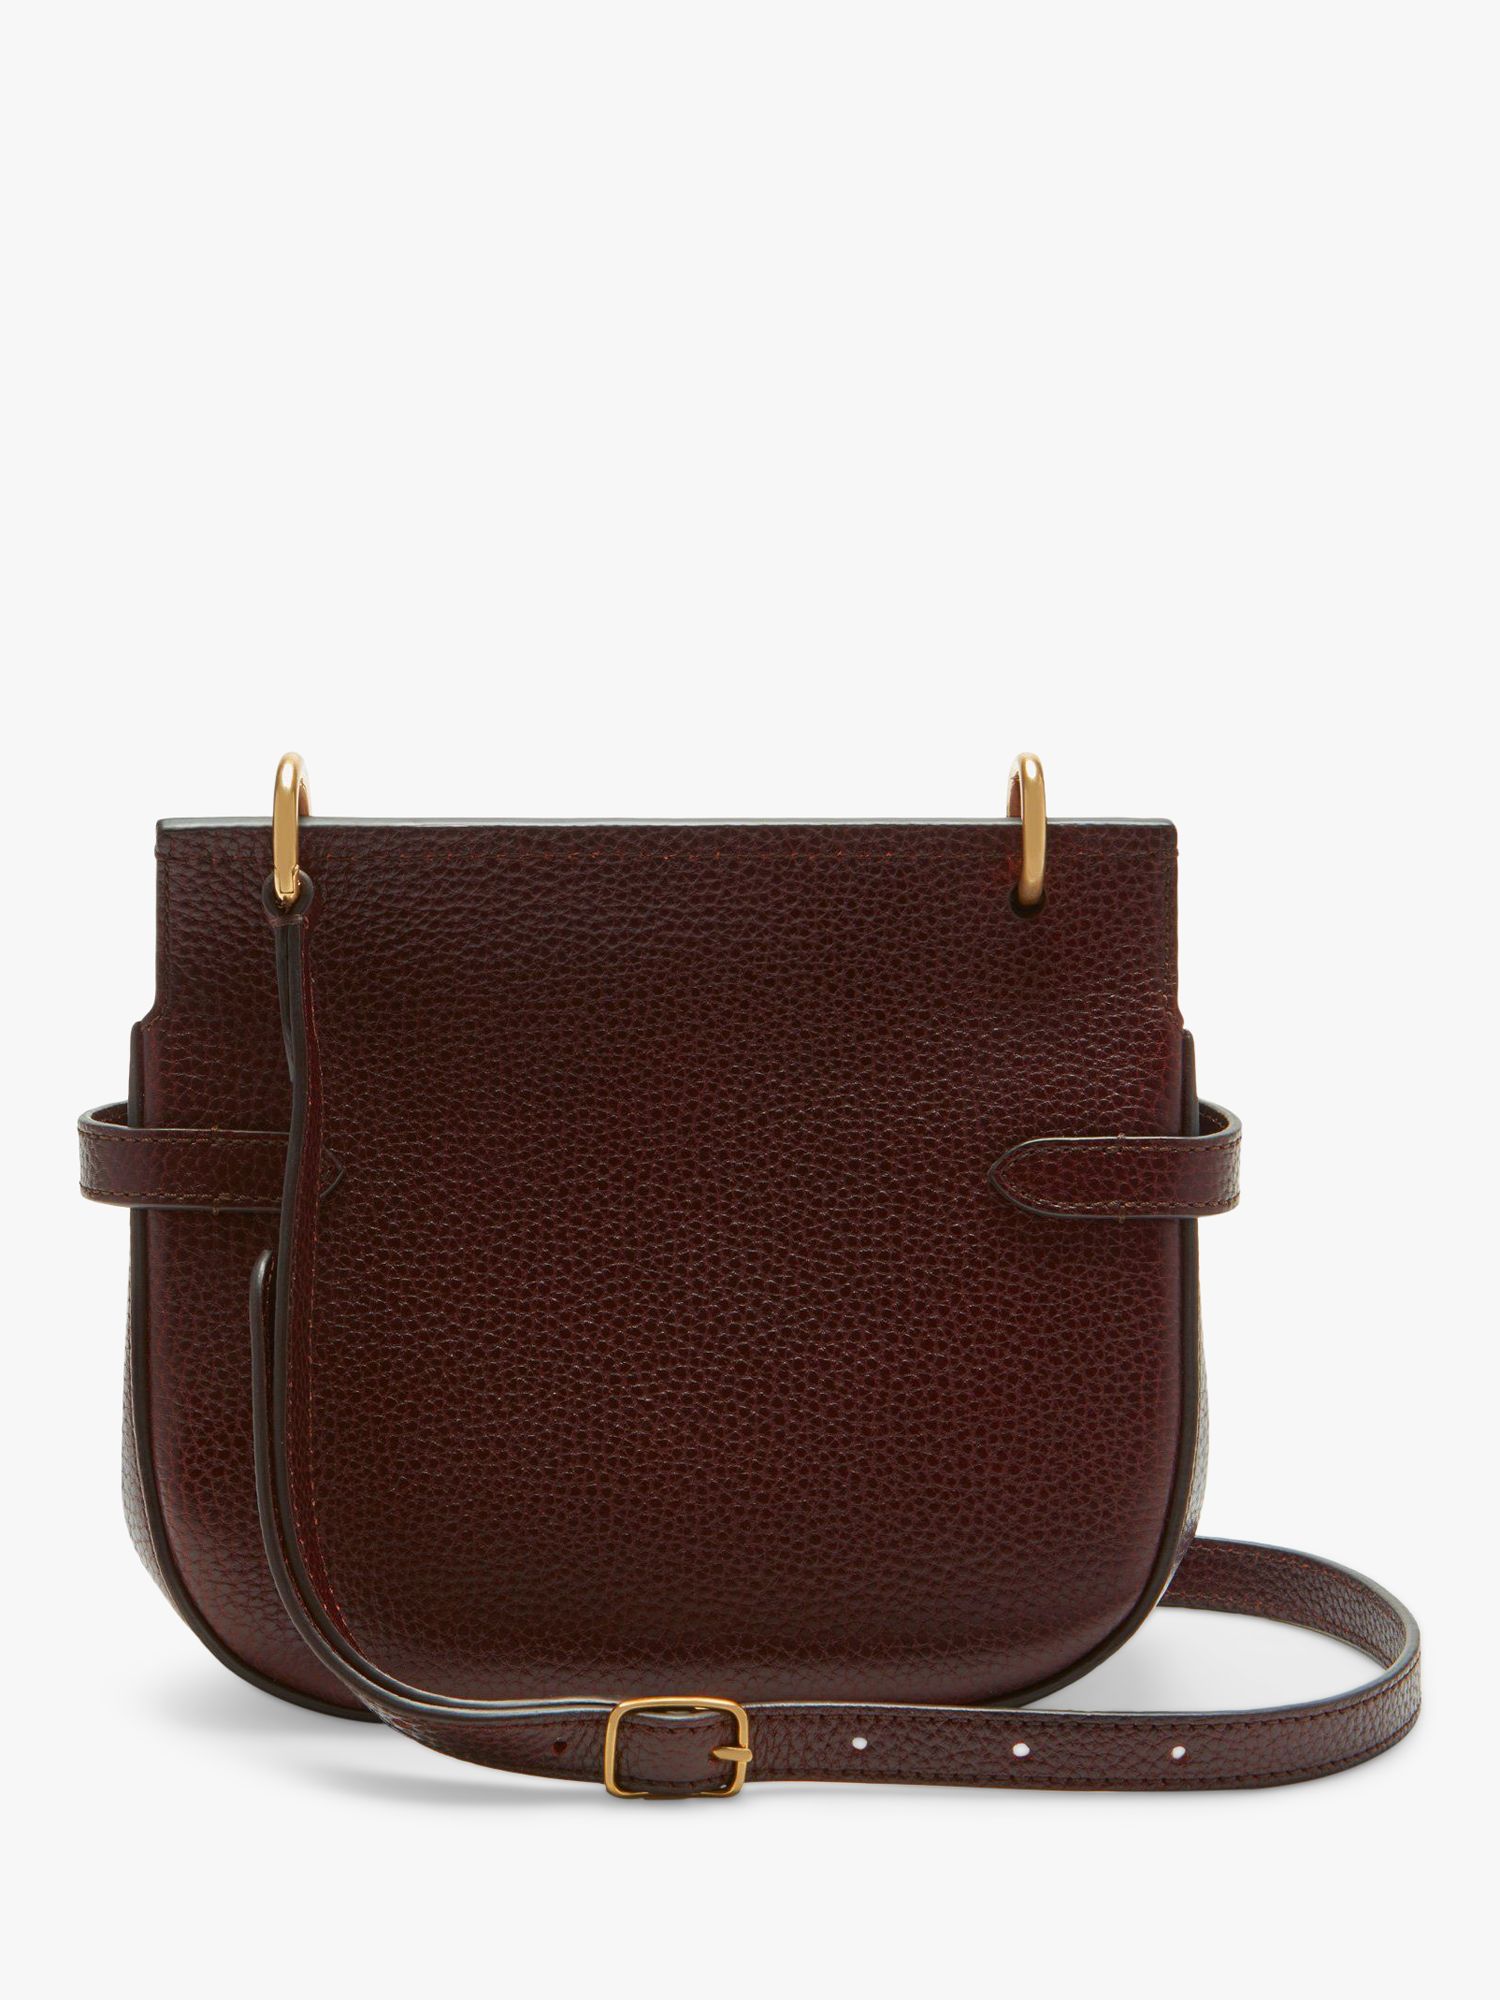 Mulberry Small Amberley Classic Grain Leather Satchel Bag, Oxblood at ...